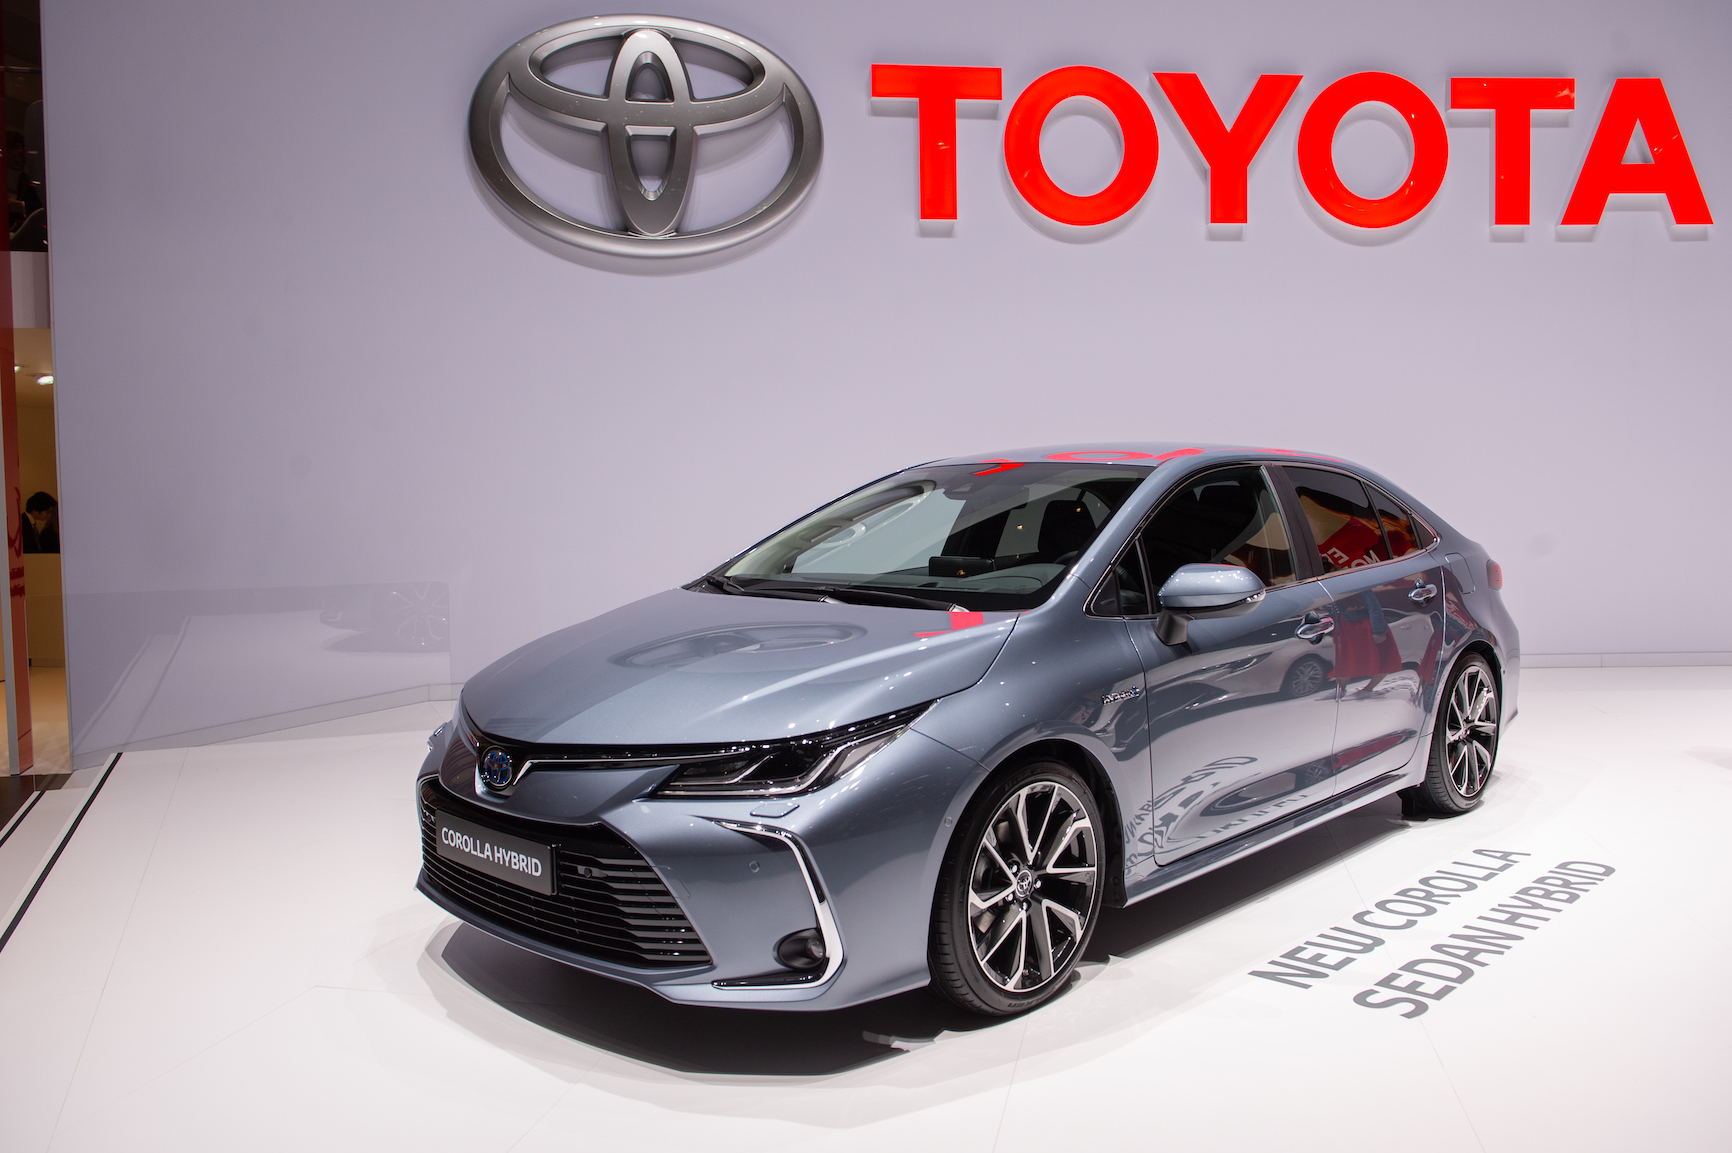 The Toyota Corolla Hybrid, competing with the Honda Civic, is displayed during the first press day at the 89th Geneva International Motor Show